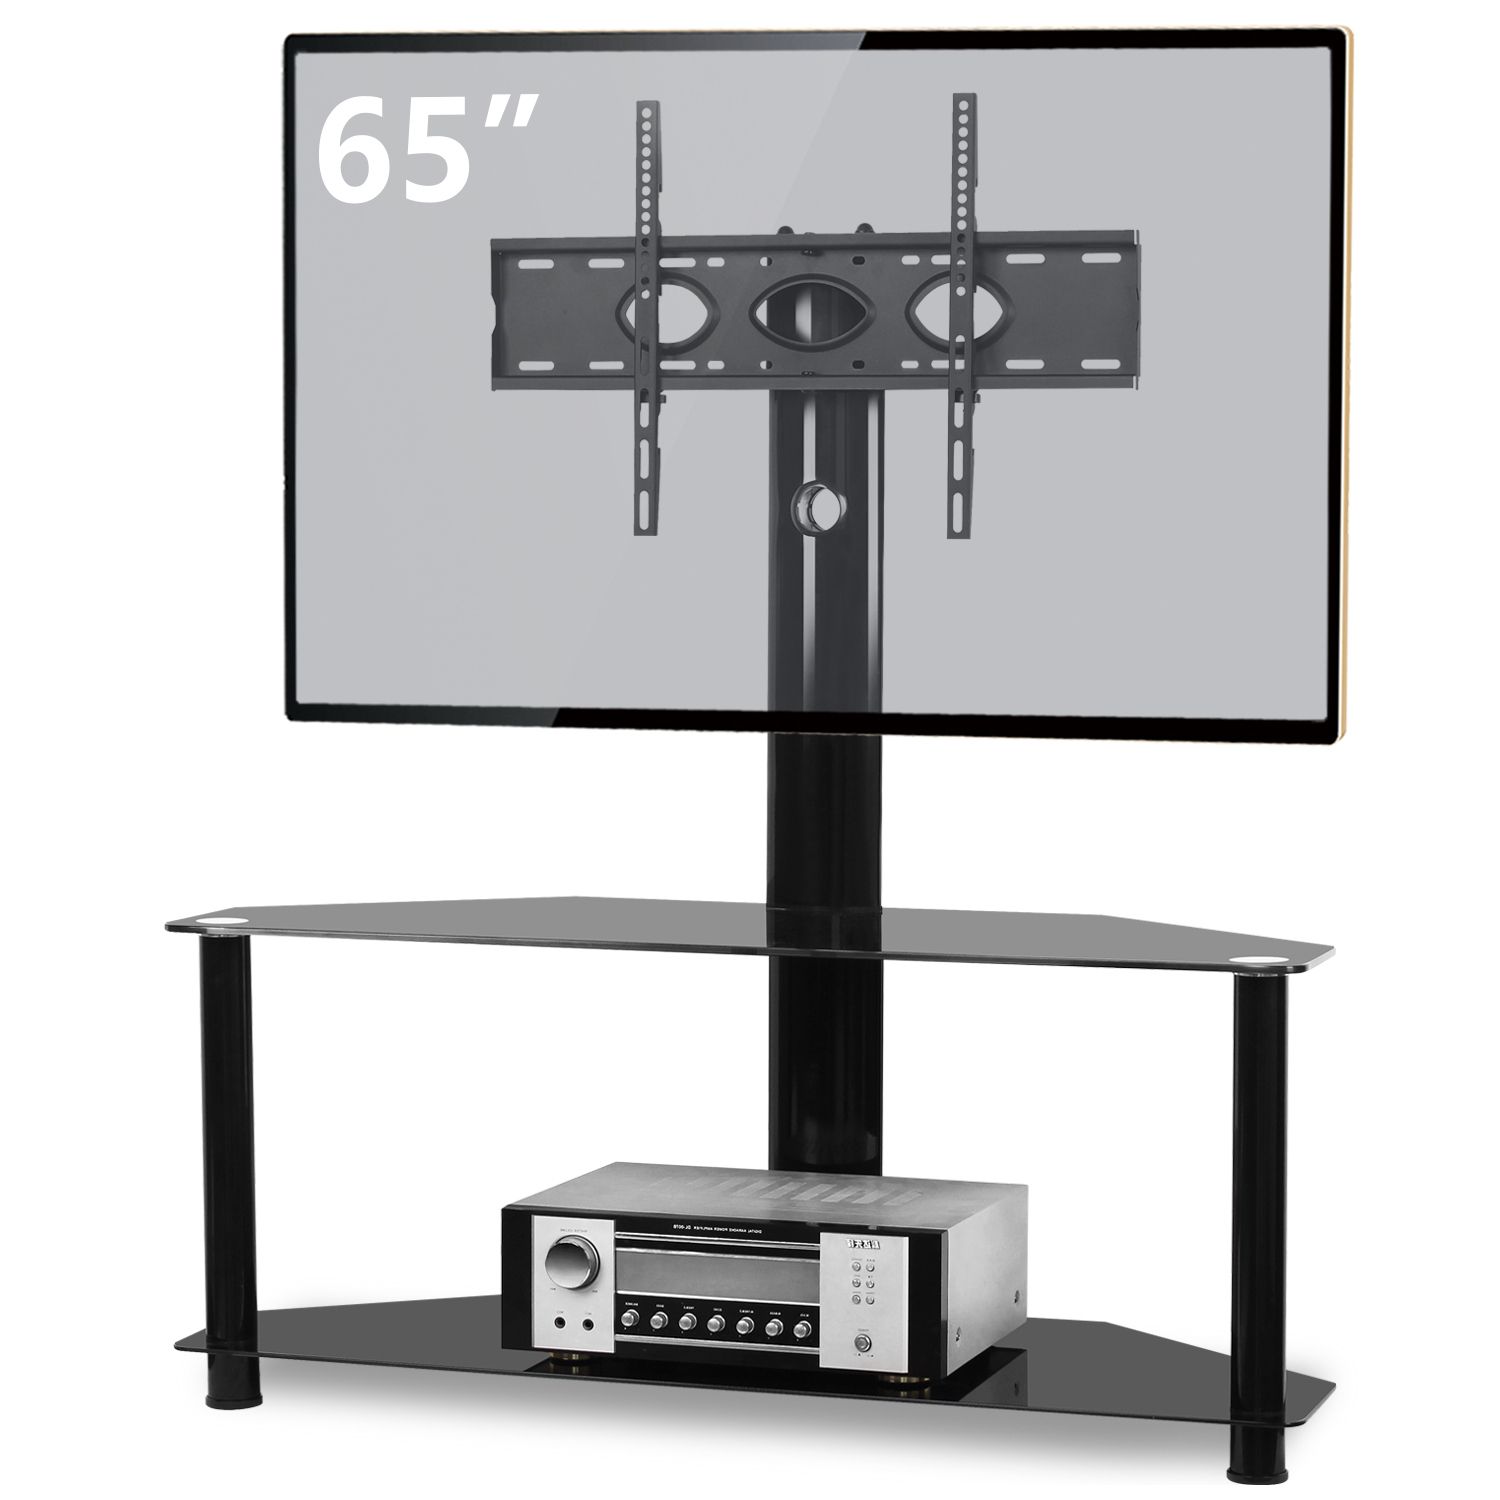 Modern Floor Tv Stand For Tvs Up To 70", Media Storage Pertaining To Glass Corner Tv Stands For Flat Screen Tvs (View 11 of 15)